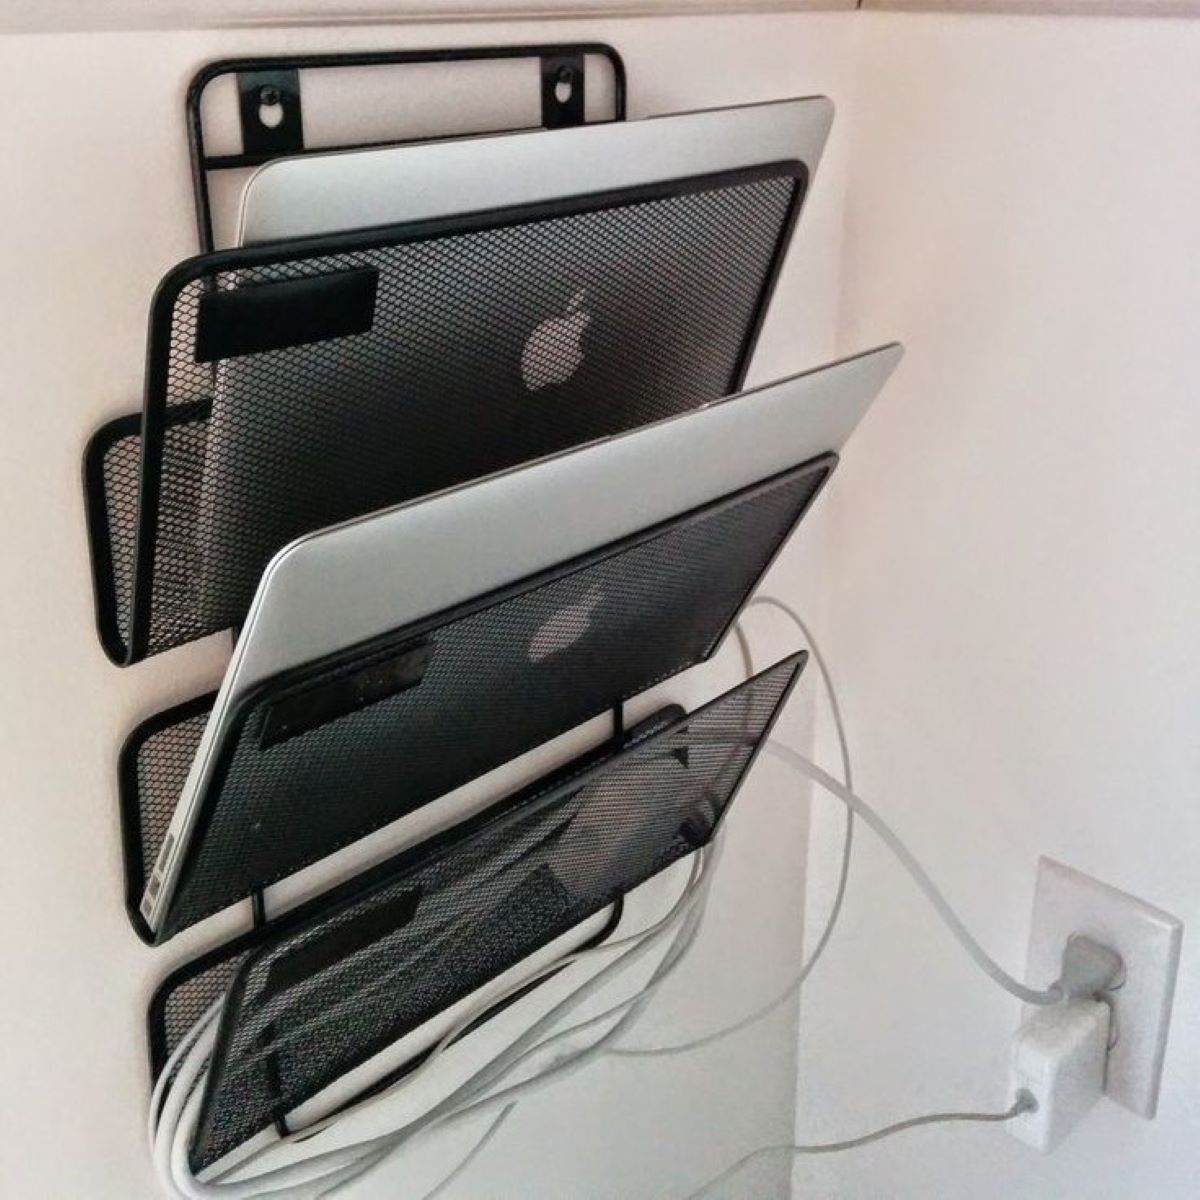 How To Store A Laptop